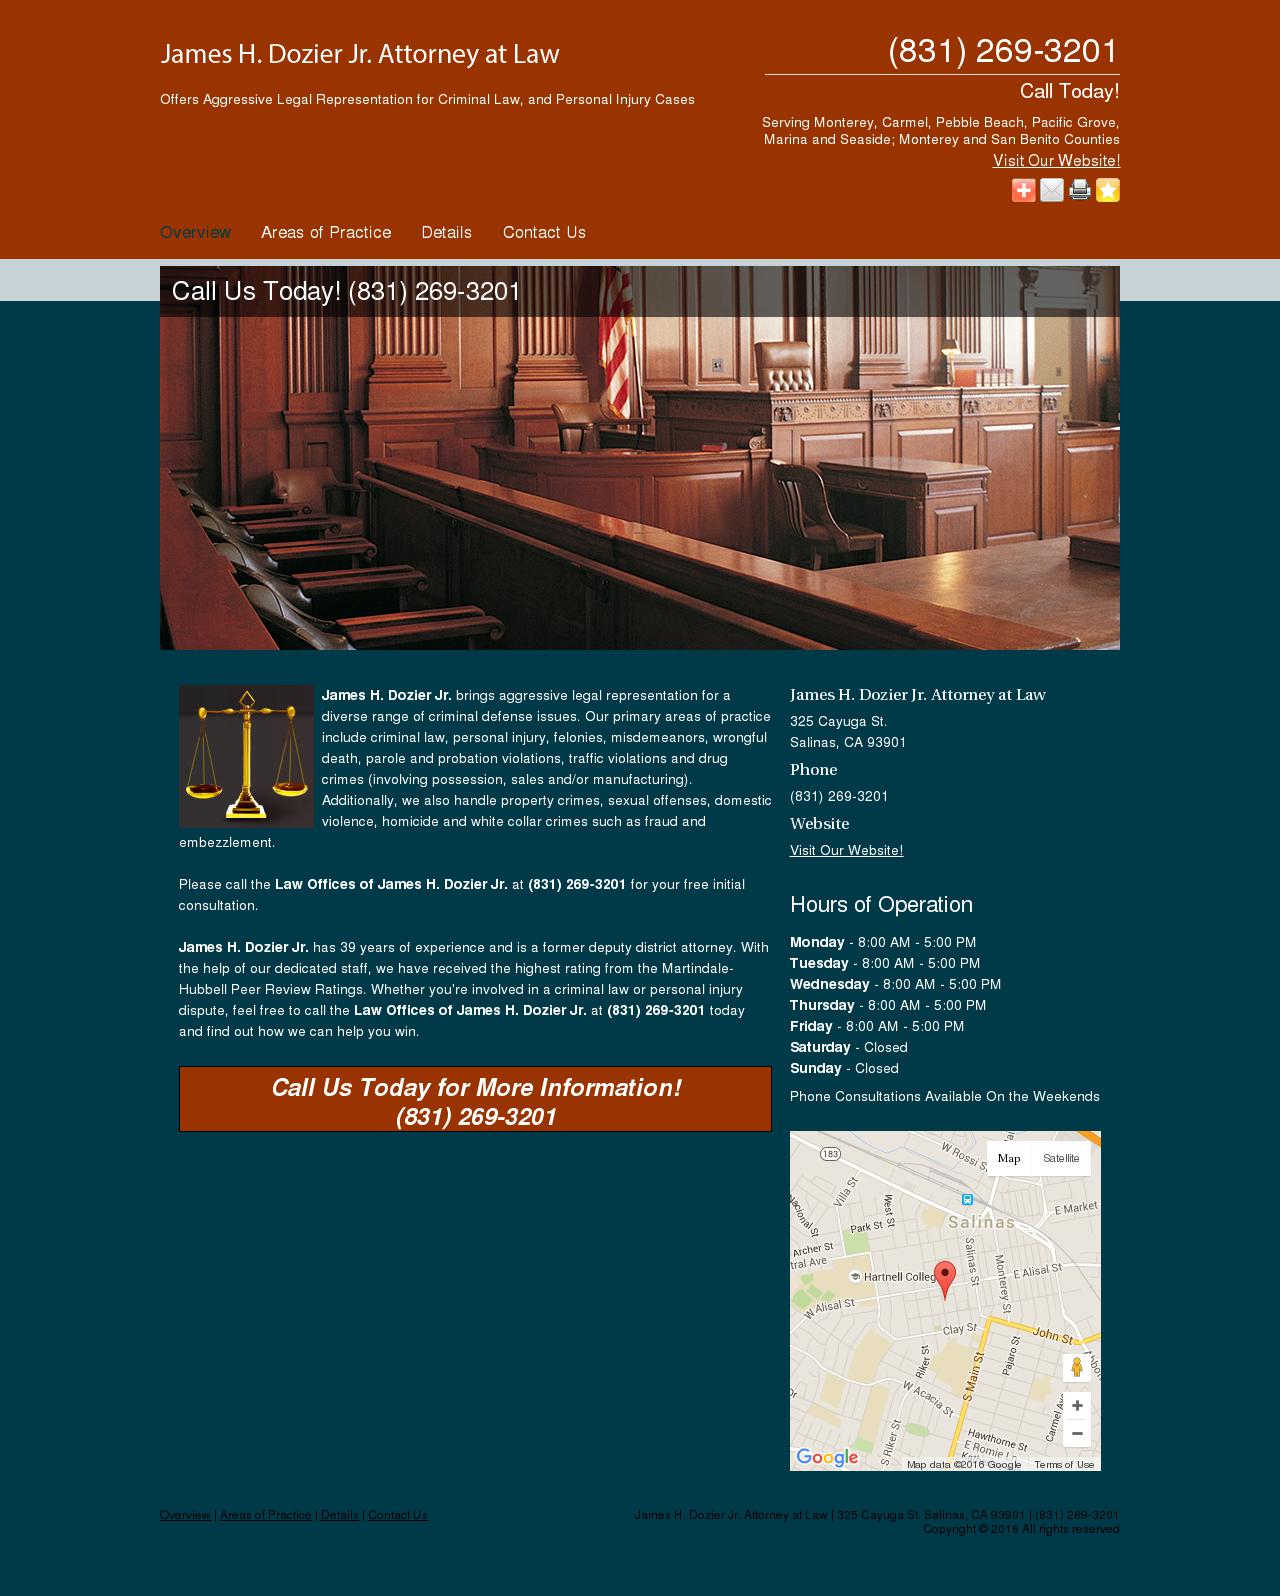 Dozier James H Jr Law Offices Of - Salinas CA Lawyers